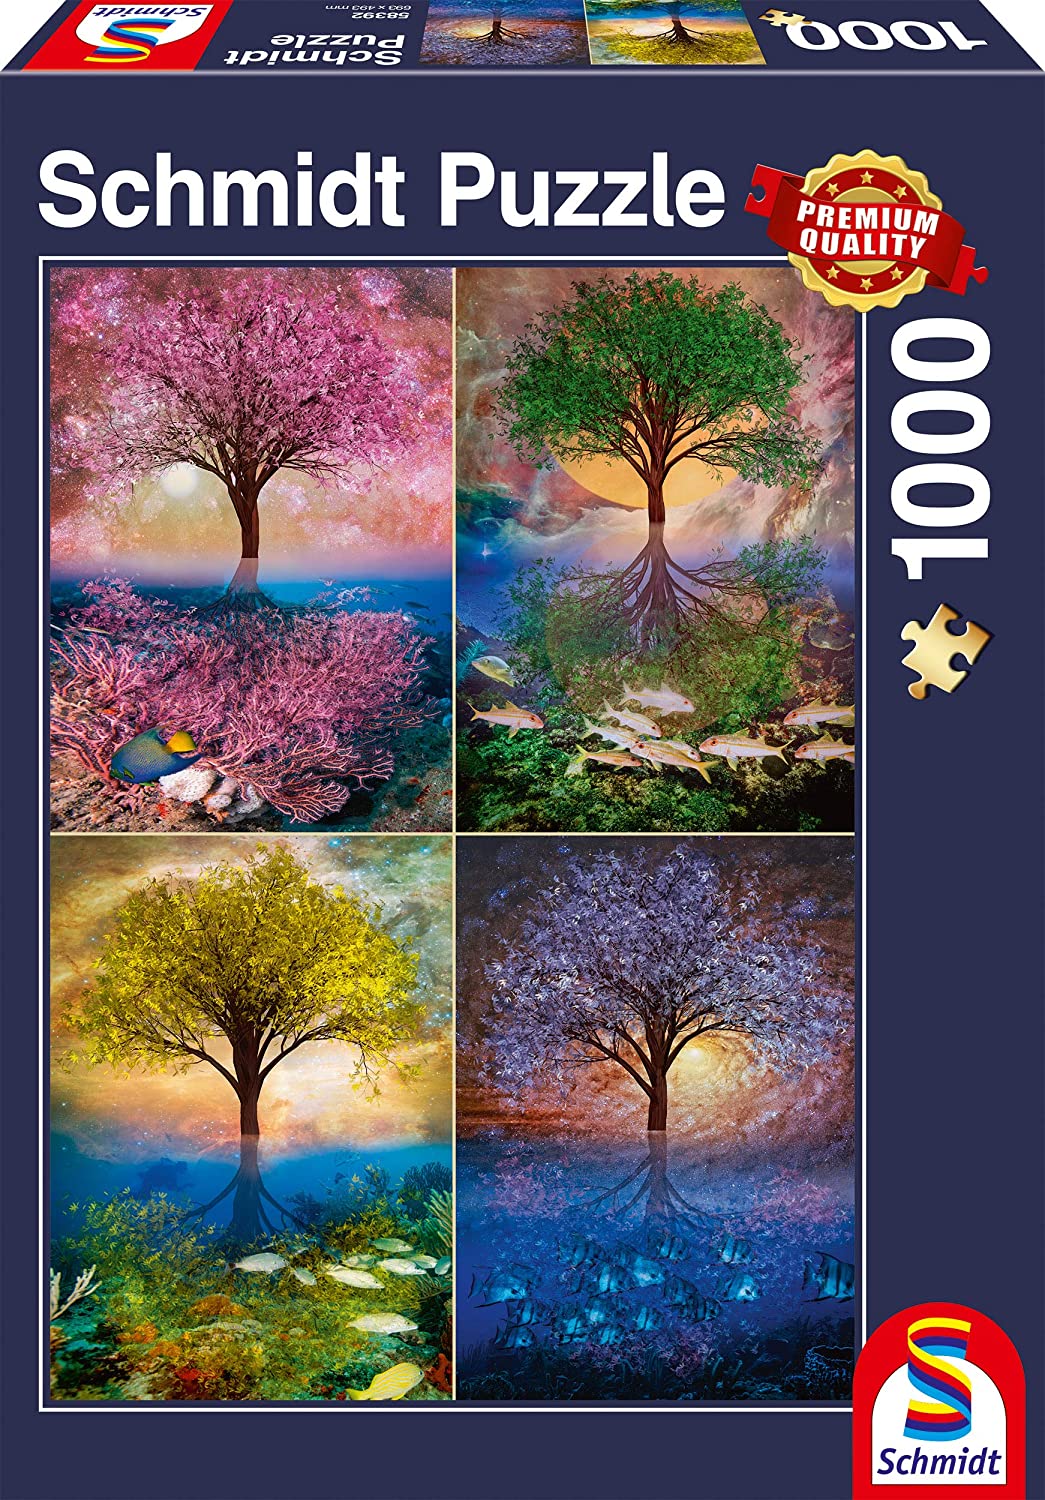 Schmidt - Magic Tree on the Lake - 1000 Piece Jigsaw Puzzle